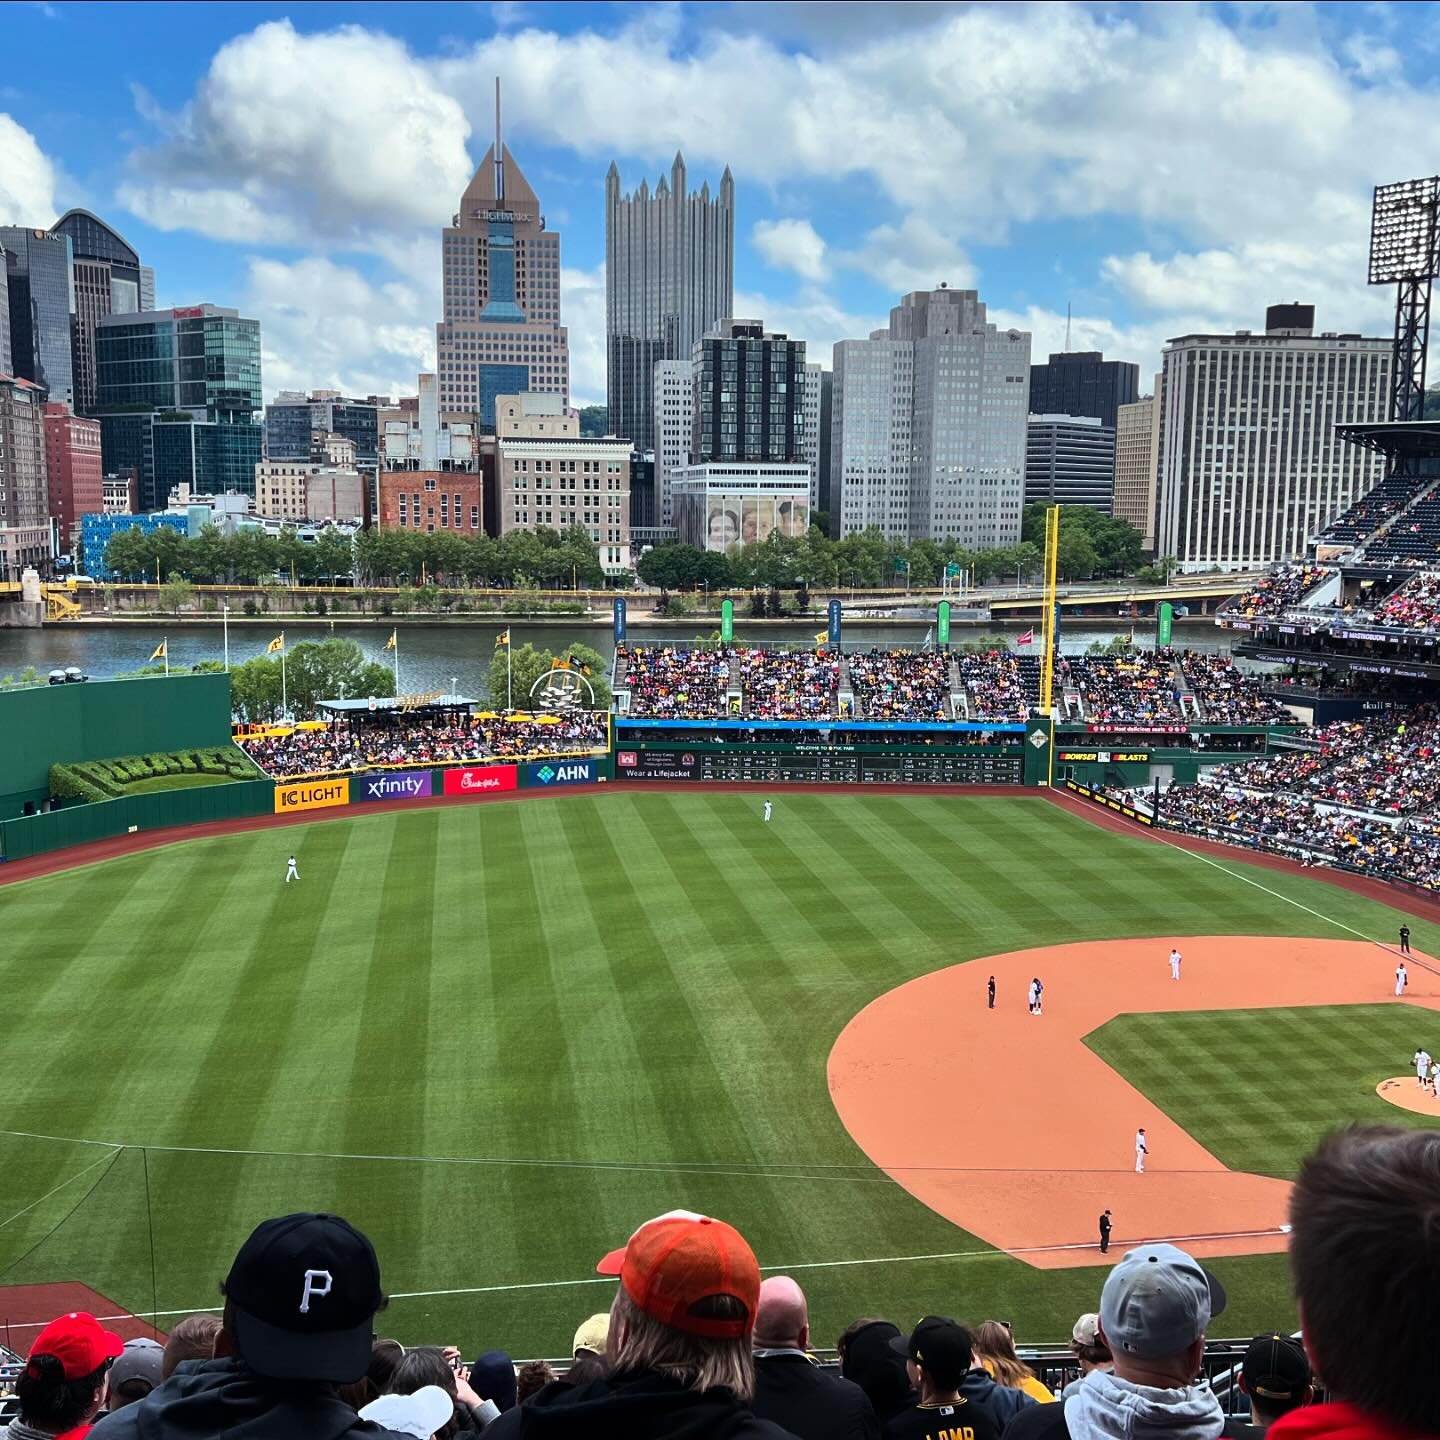 Stepping into PNC Park for the first time was unforgettable! As a proud Pittsburgher rooting for the Cubs, I felt a connection to my grandfather&rsquo;s dreams on the pitching mound. With friends and @pulledanadam by my side, we soaked in the electri